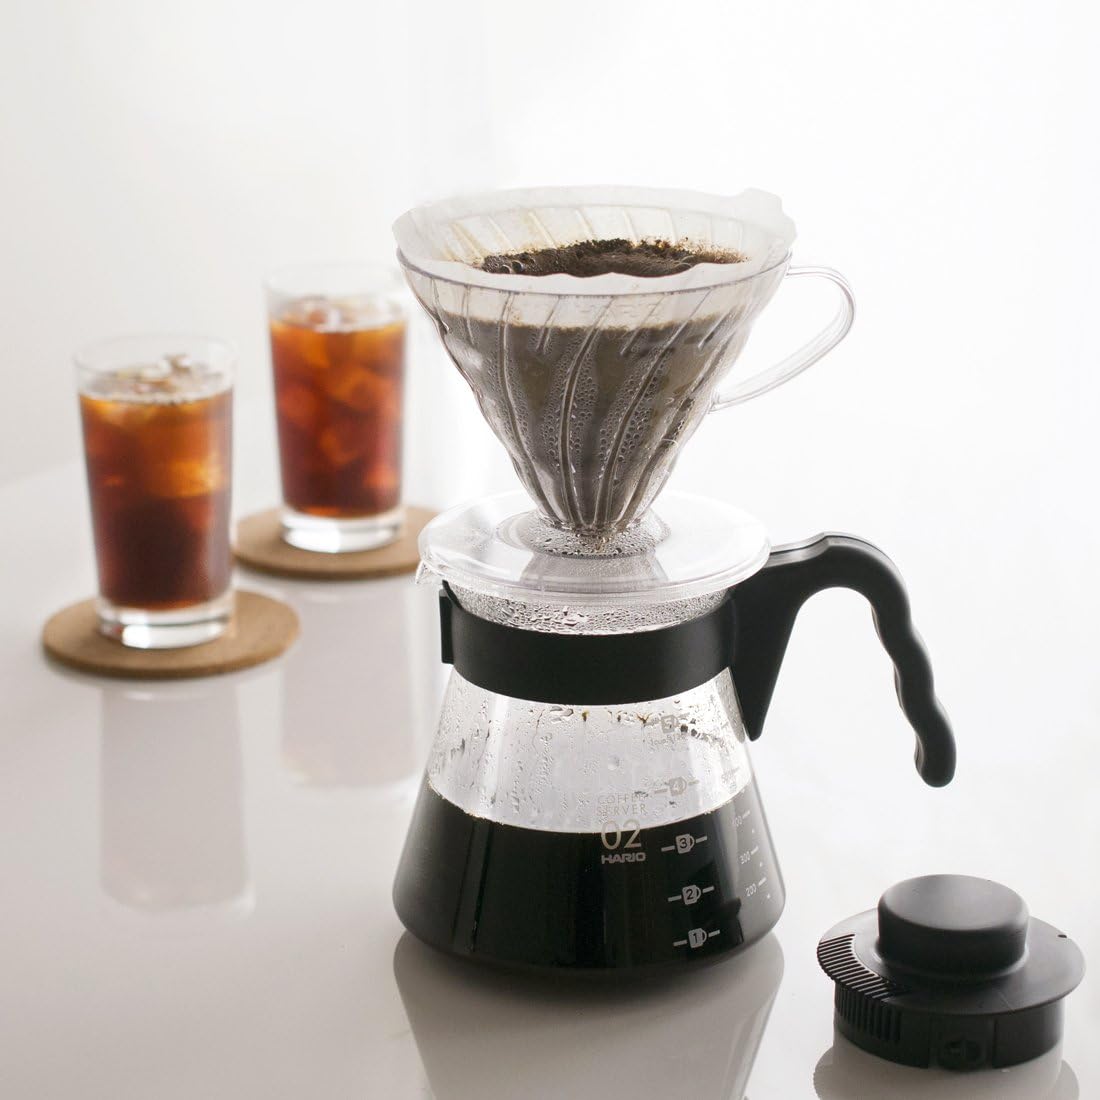 Hario V60 Pour Over Starter Set with Dripper, Glass Server, Scoop and Filters, Size 02, Brown - SQN station